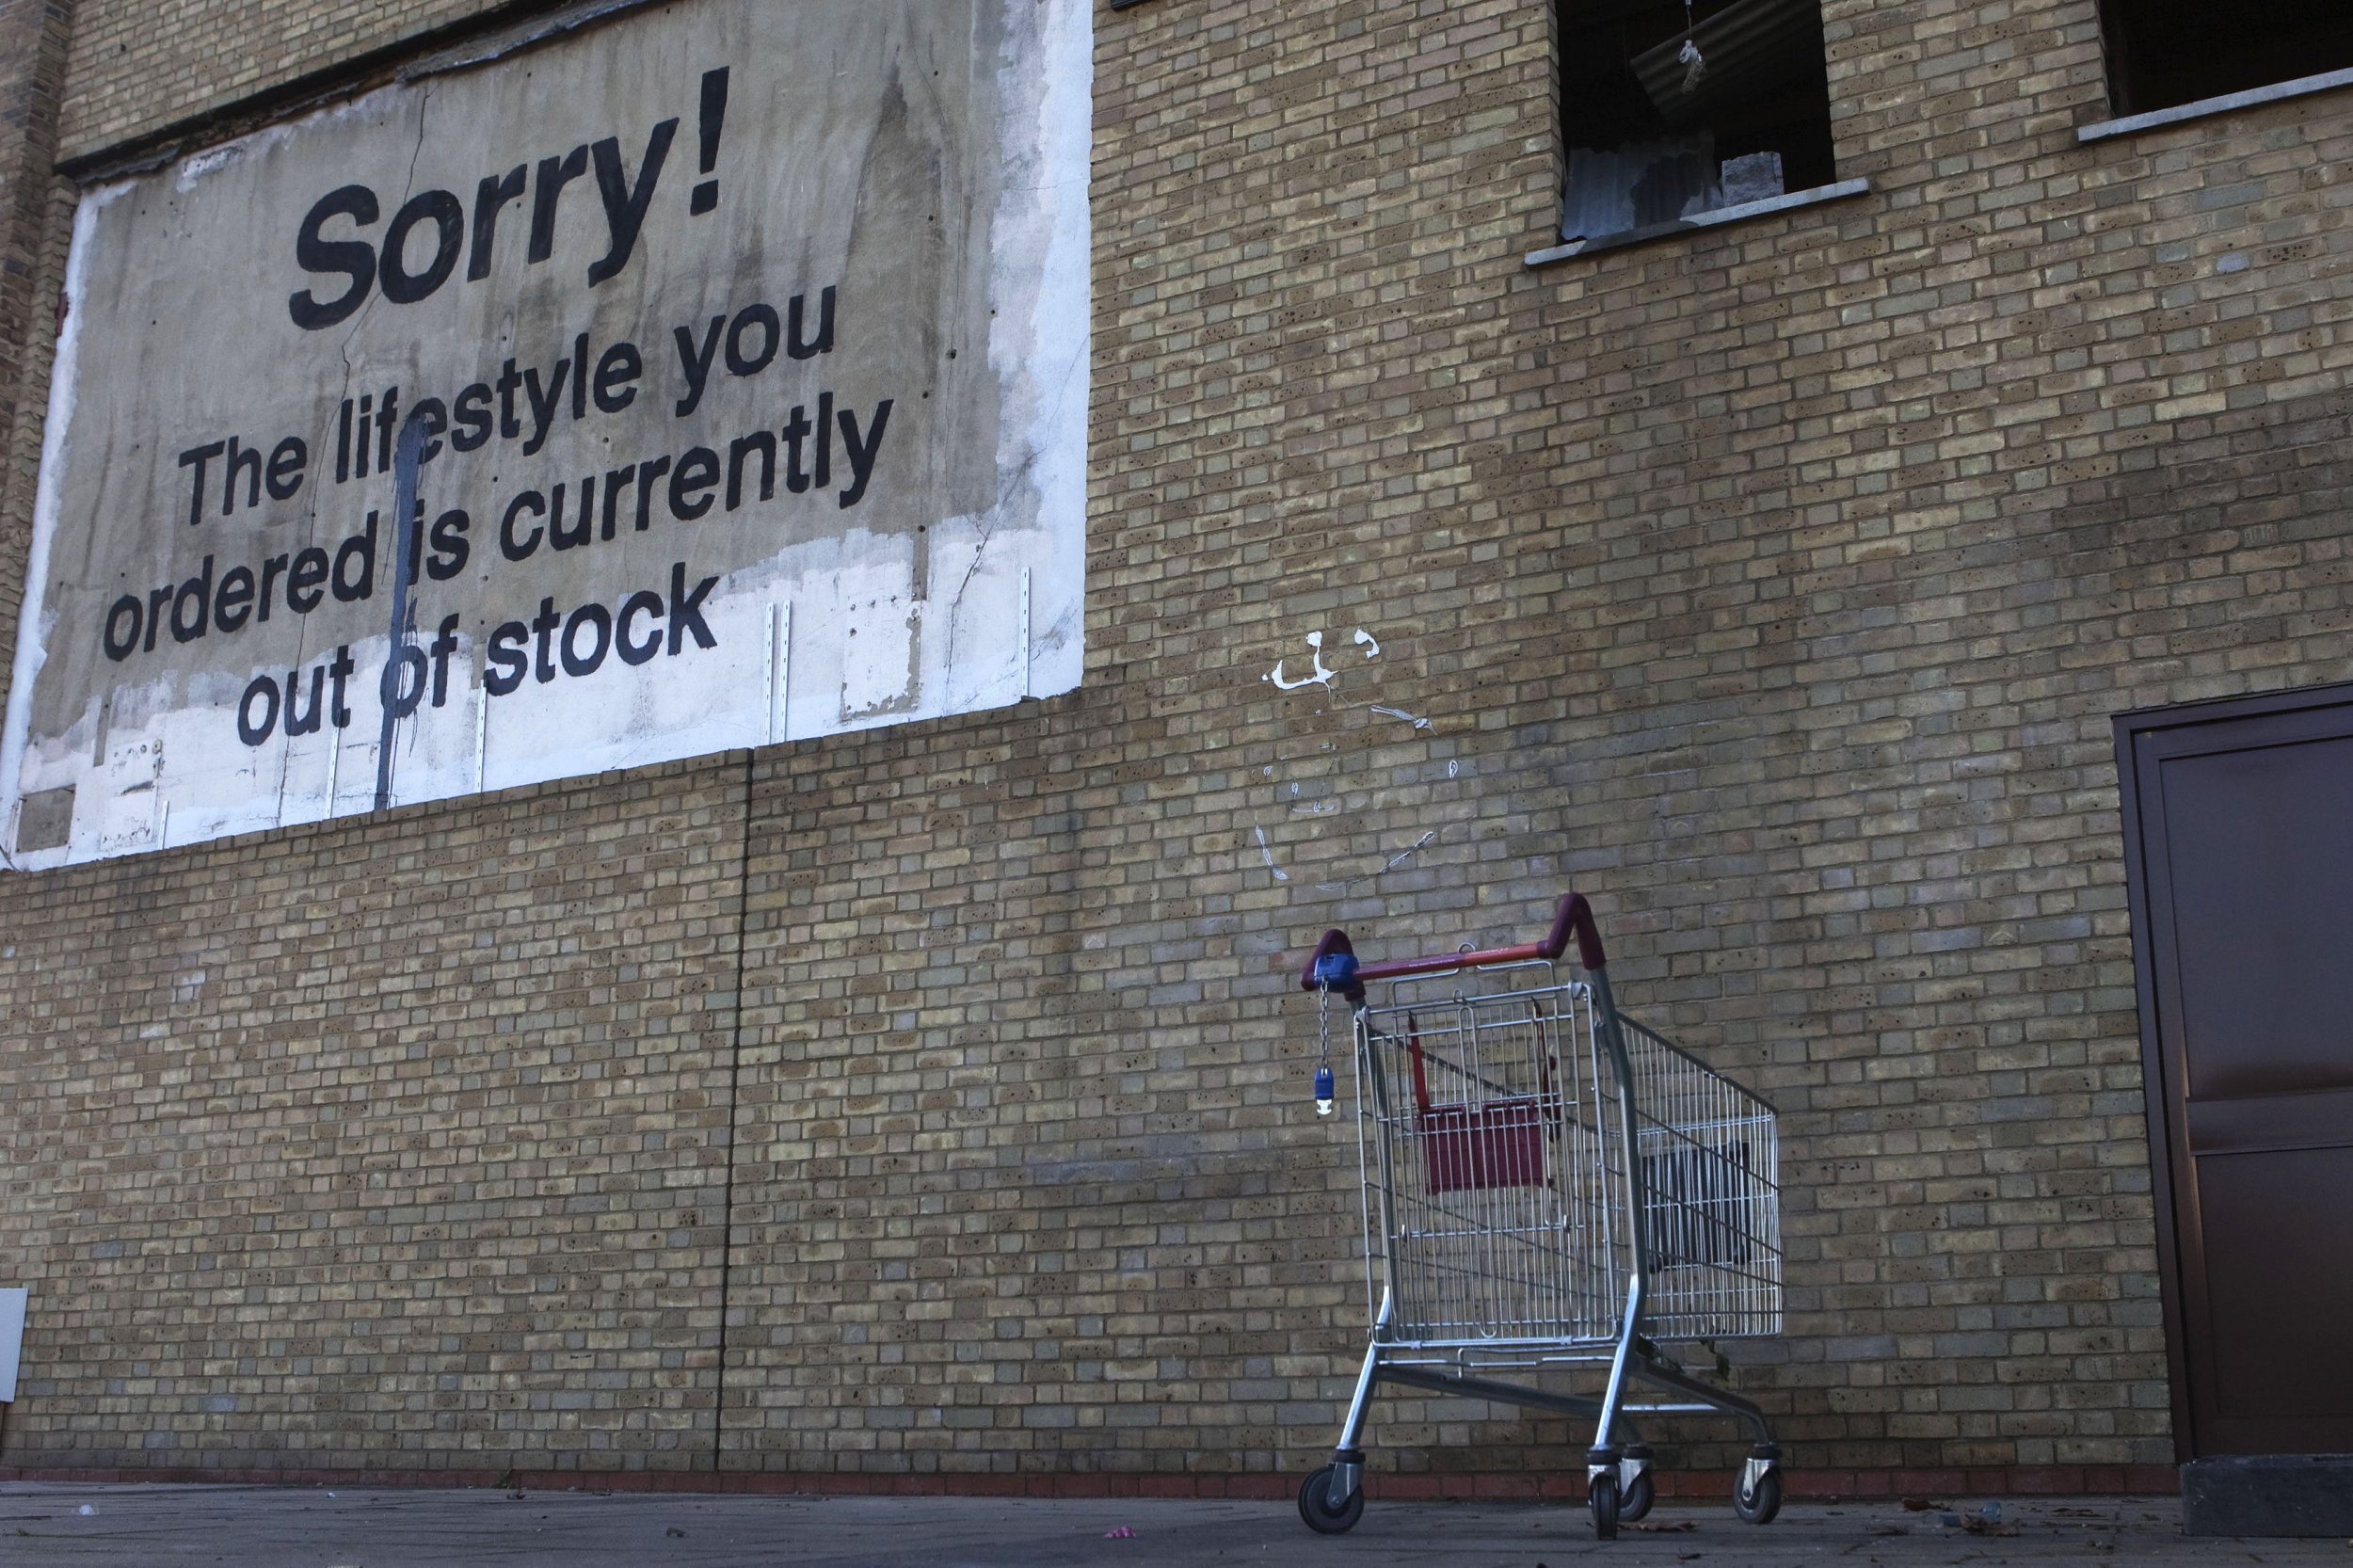 In Photos: Banksy Returns With Mural Criticizing Treatment of ...